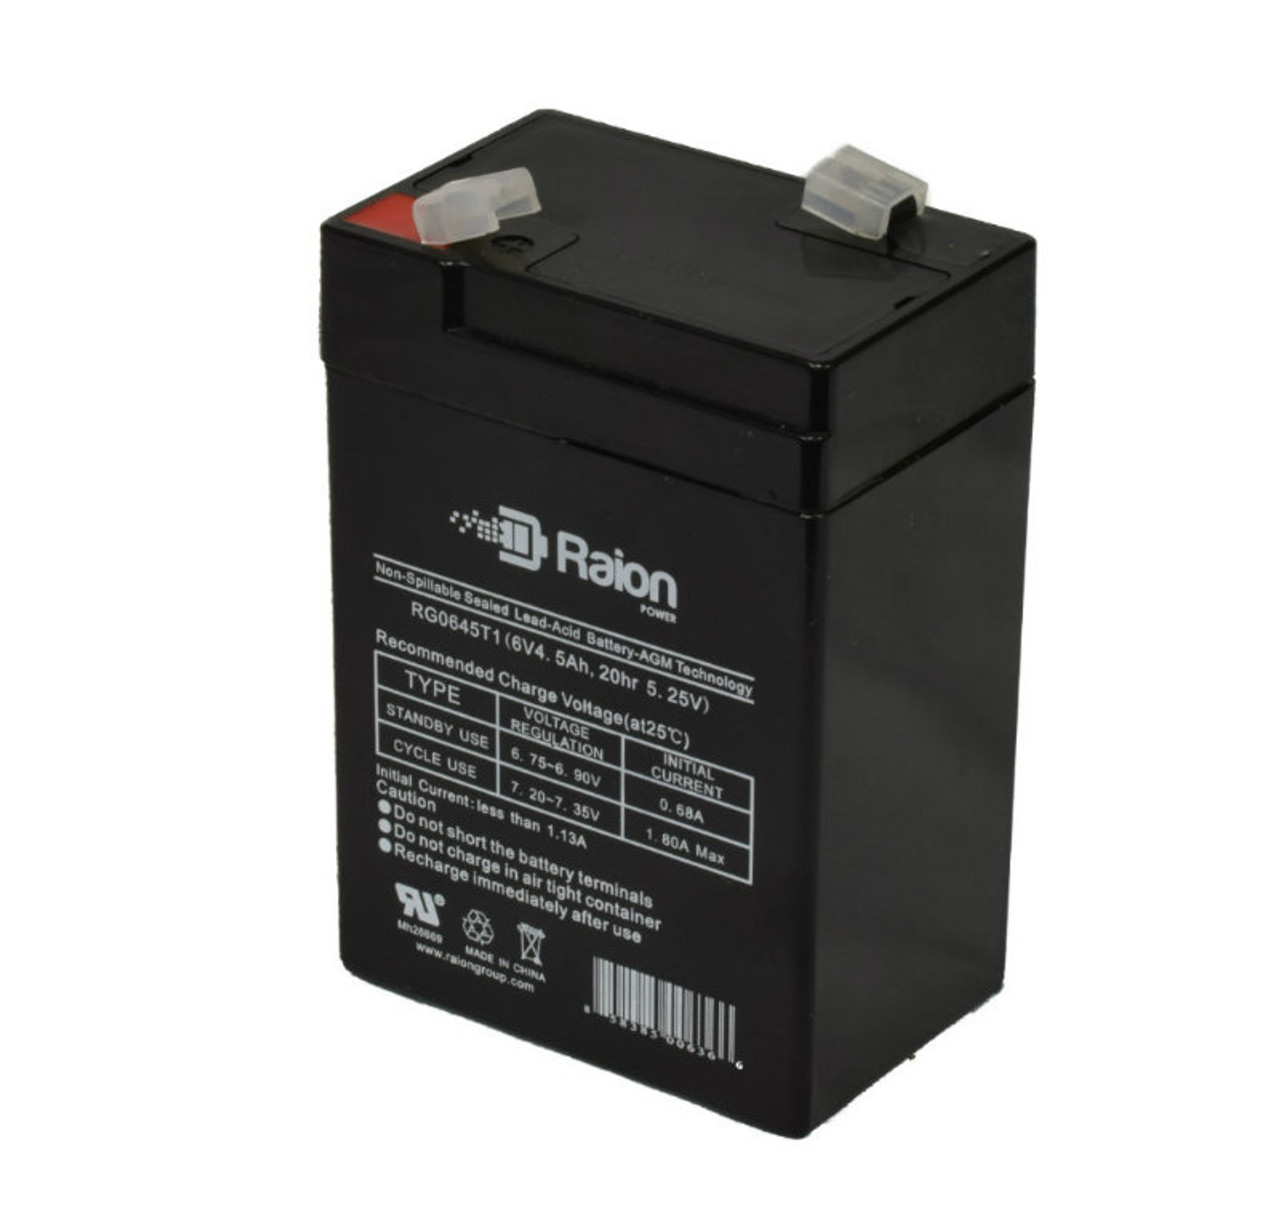 Raion Power RG0645T1 6V 4.5Ah Replacement Battery Cartridge for Sure-Lites SL26117